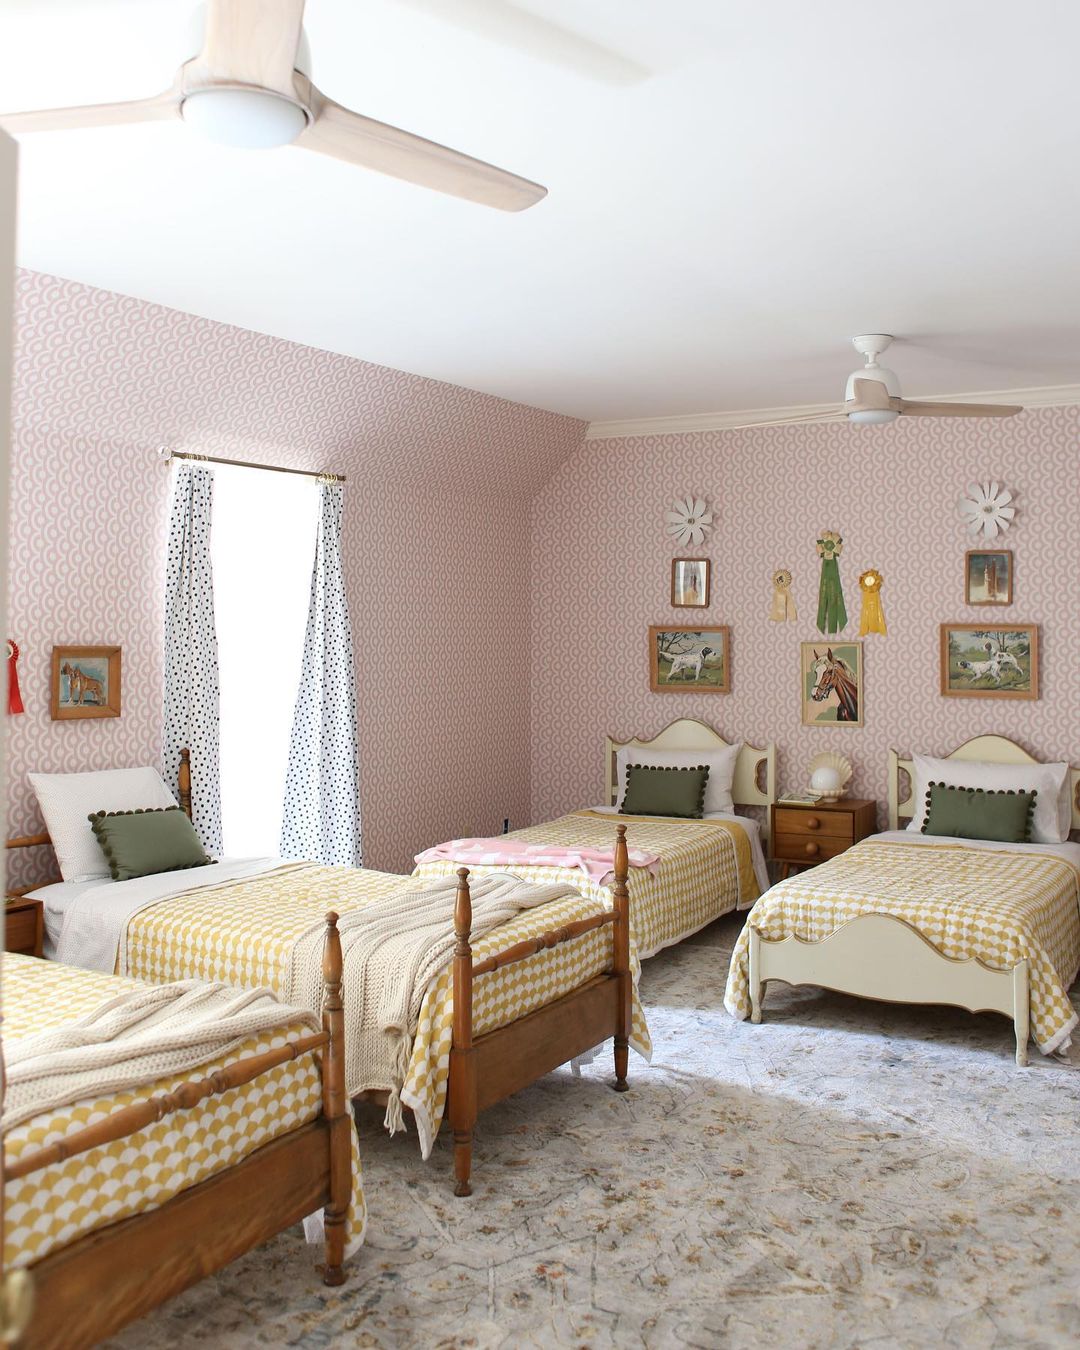 A sisters bedroom with 4 beds.